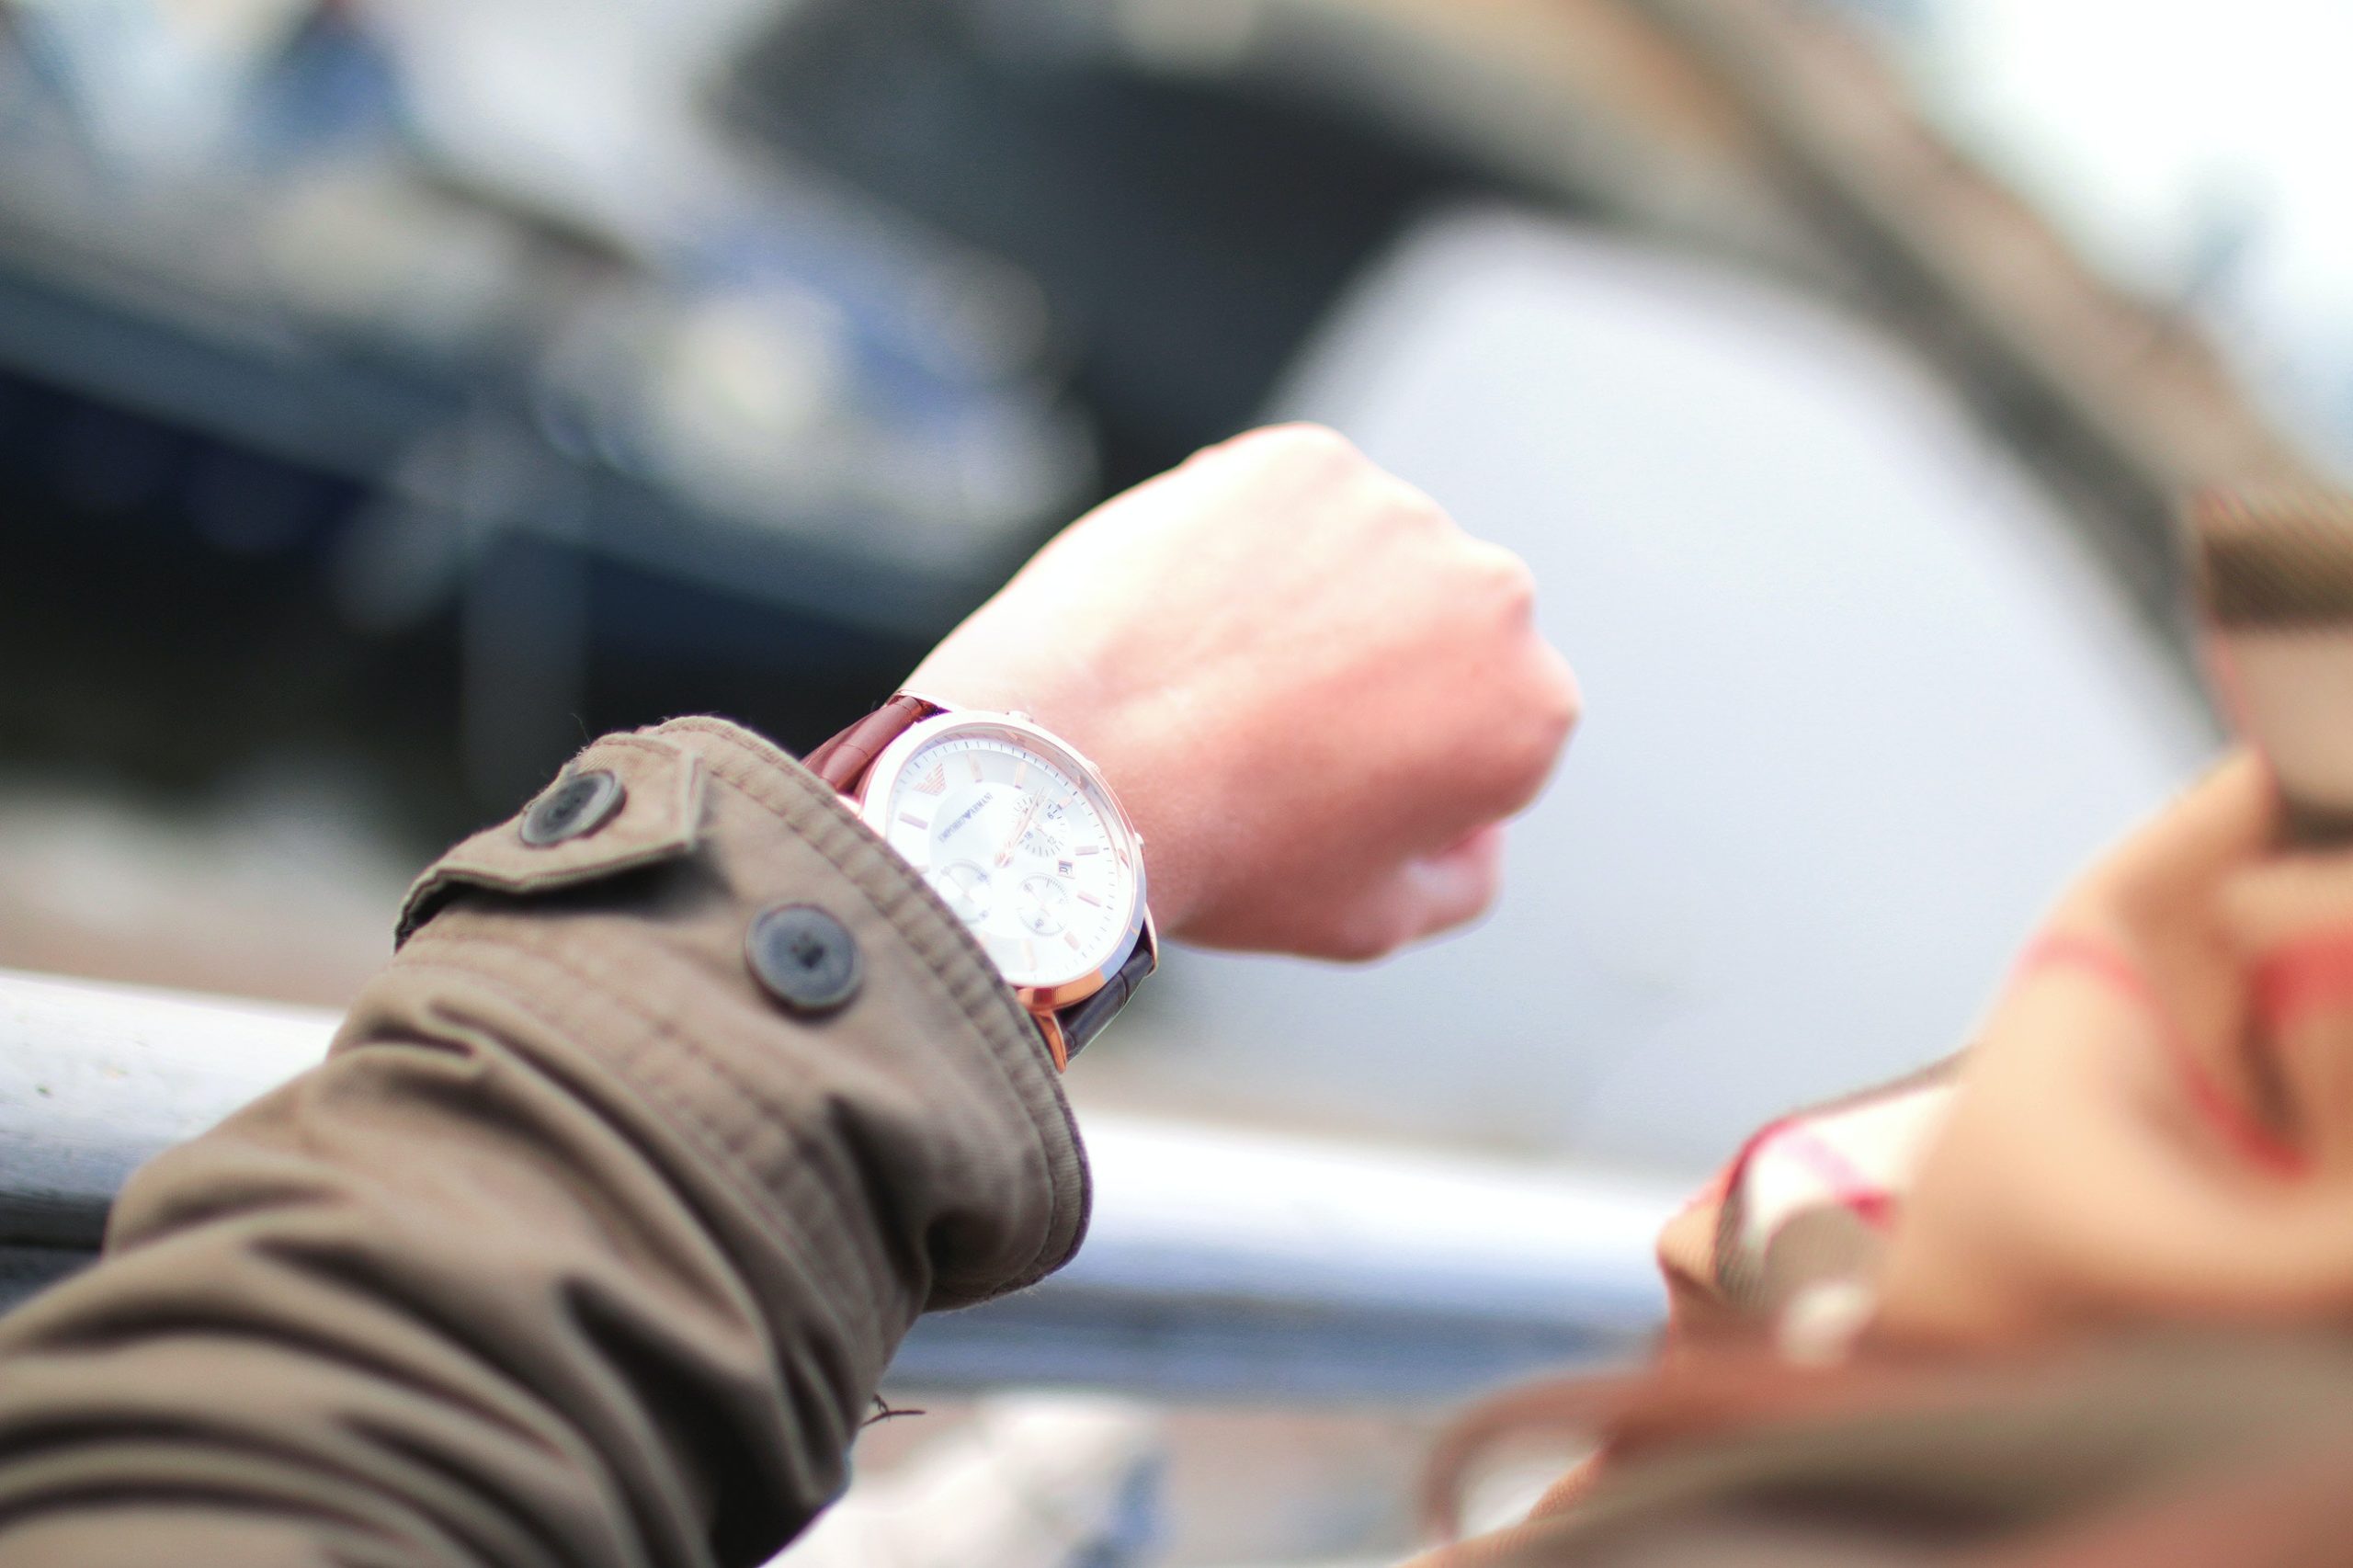 A person's wrist displaying a watch.